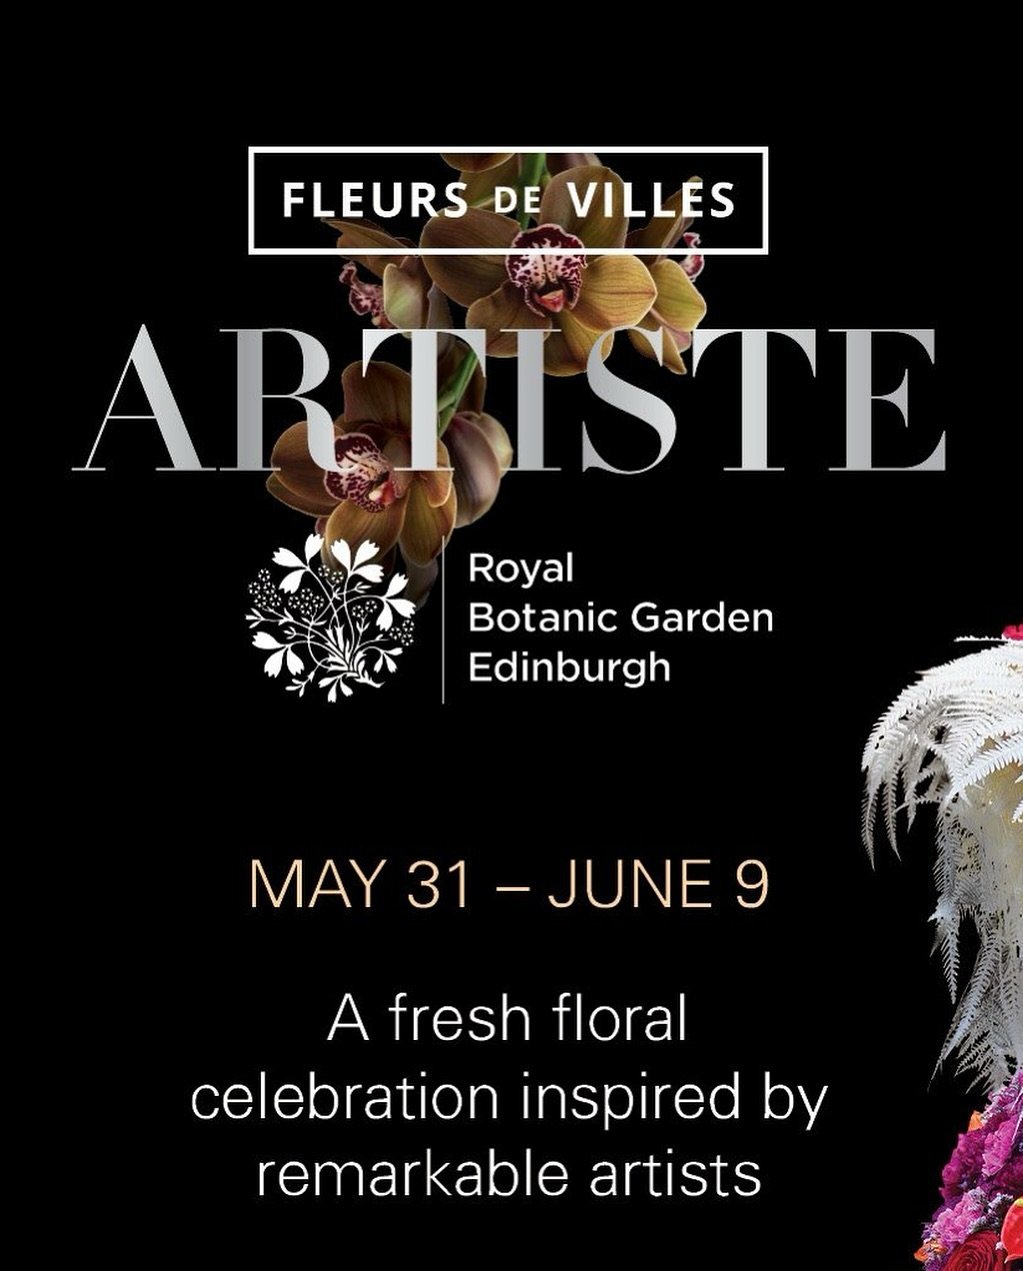 Very excited to be invited to show at the @fleursdevilles Edinburgh event, Artiste! May 31st-June 9th